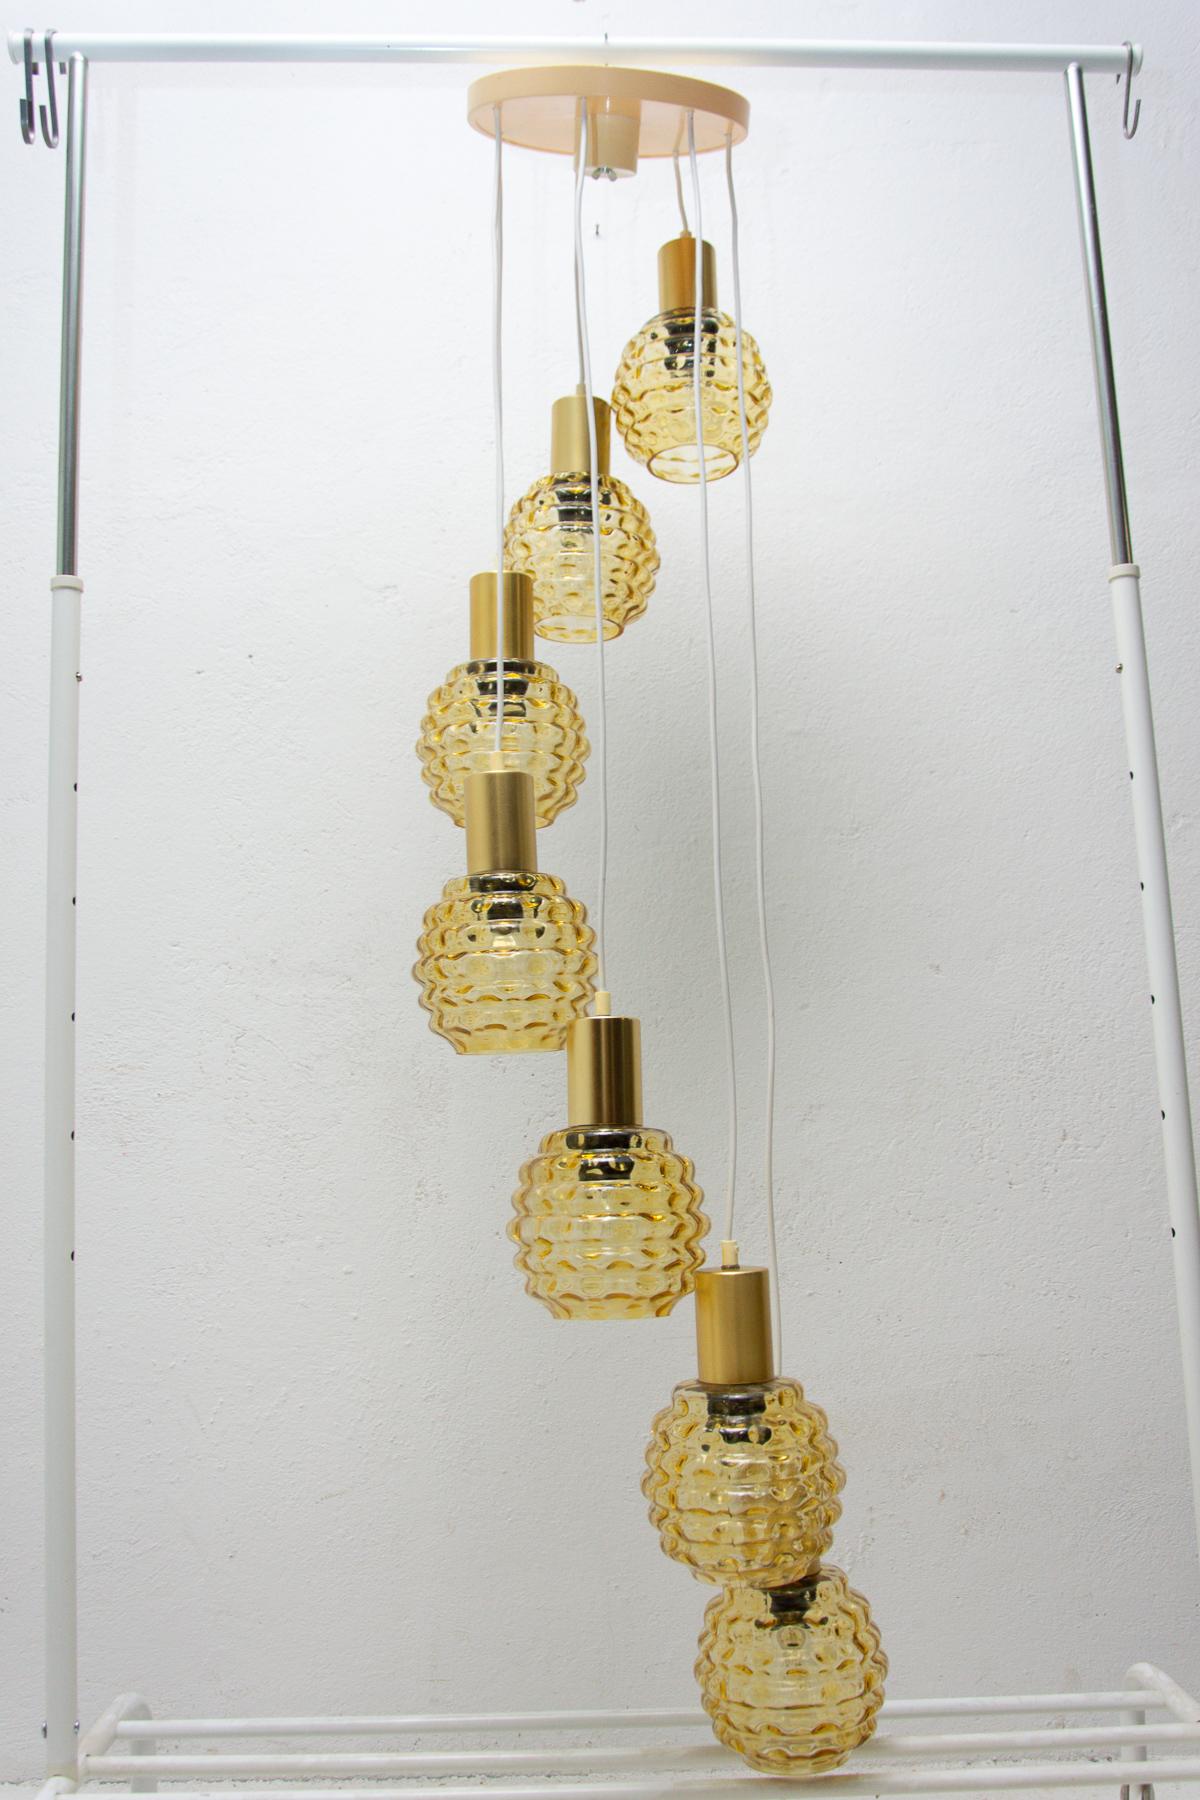 20th Century Vintage Hanging Chandelier with Seven Glass Lampshades, Pokrok Žilina, Czech